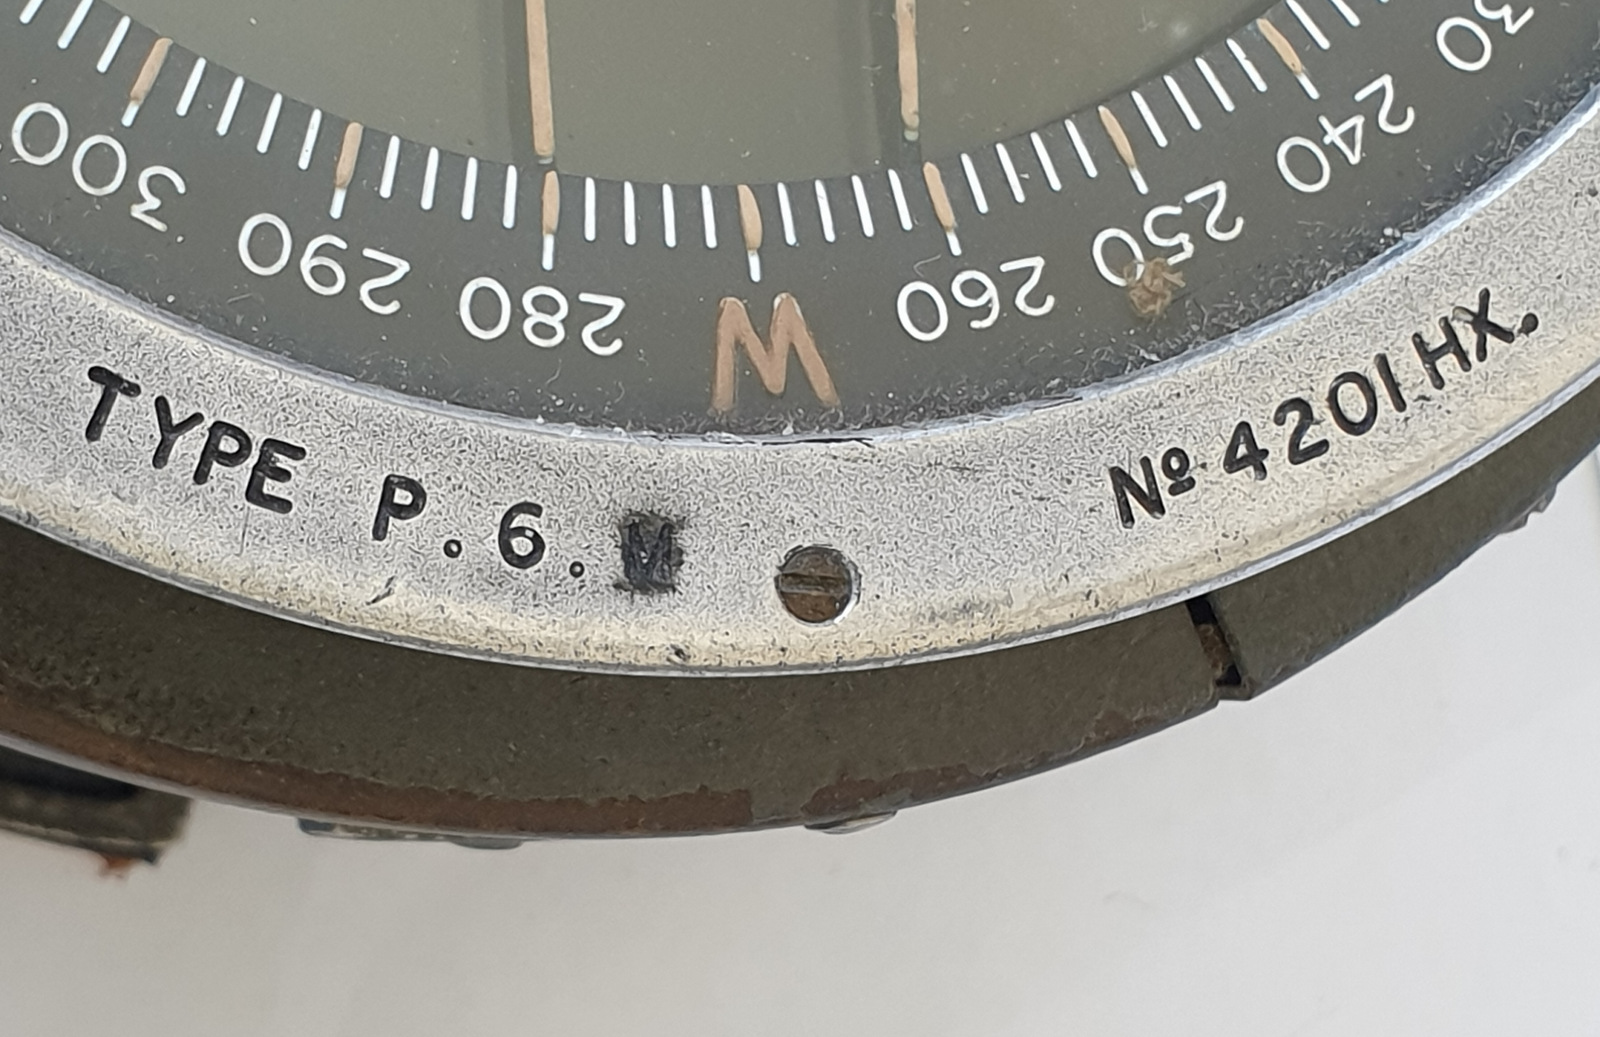 Ww2 Type P6 Military Compass - Image 4 of 6